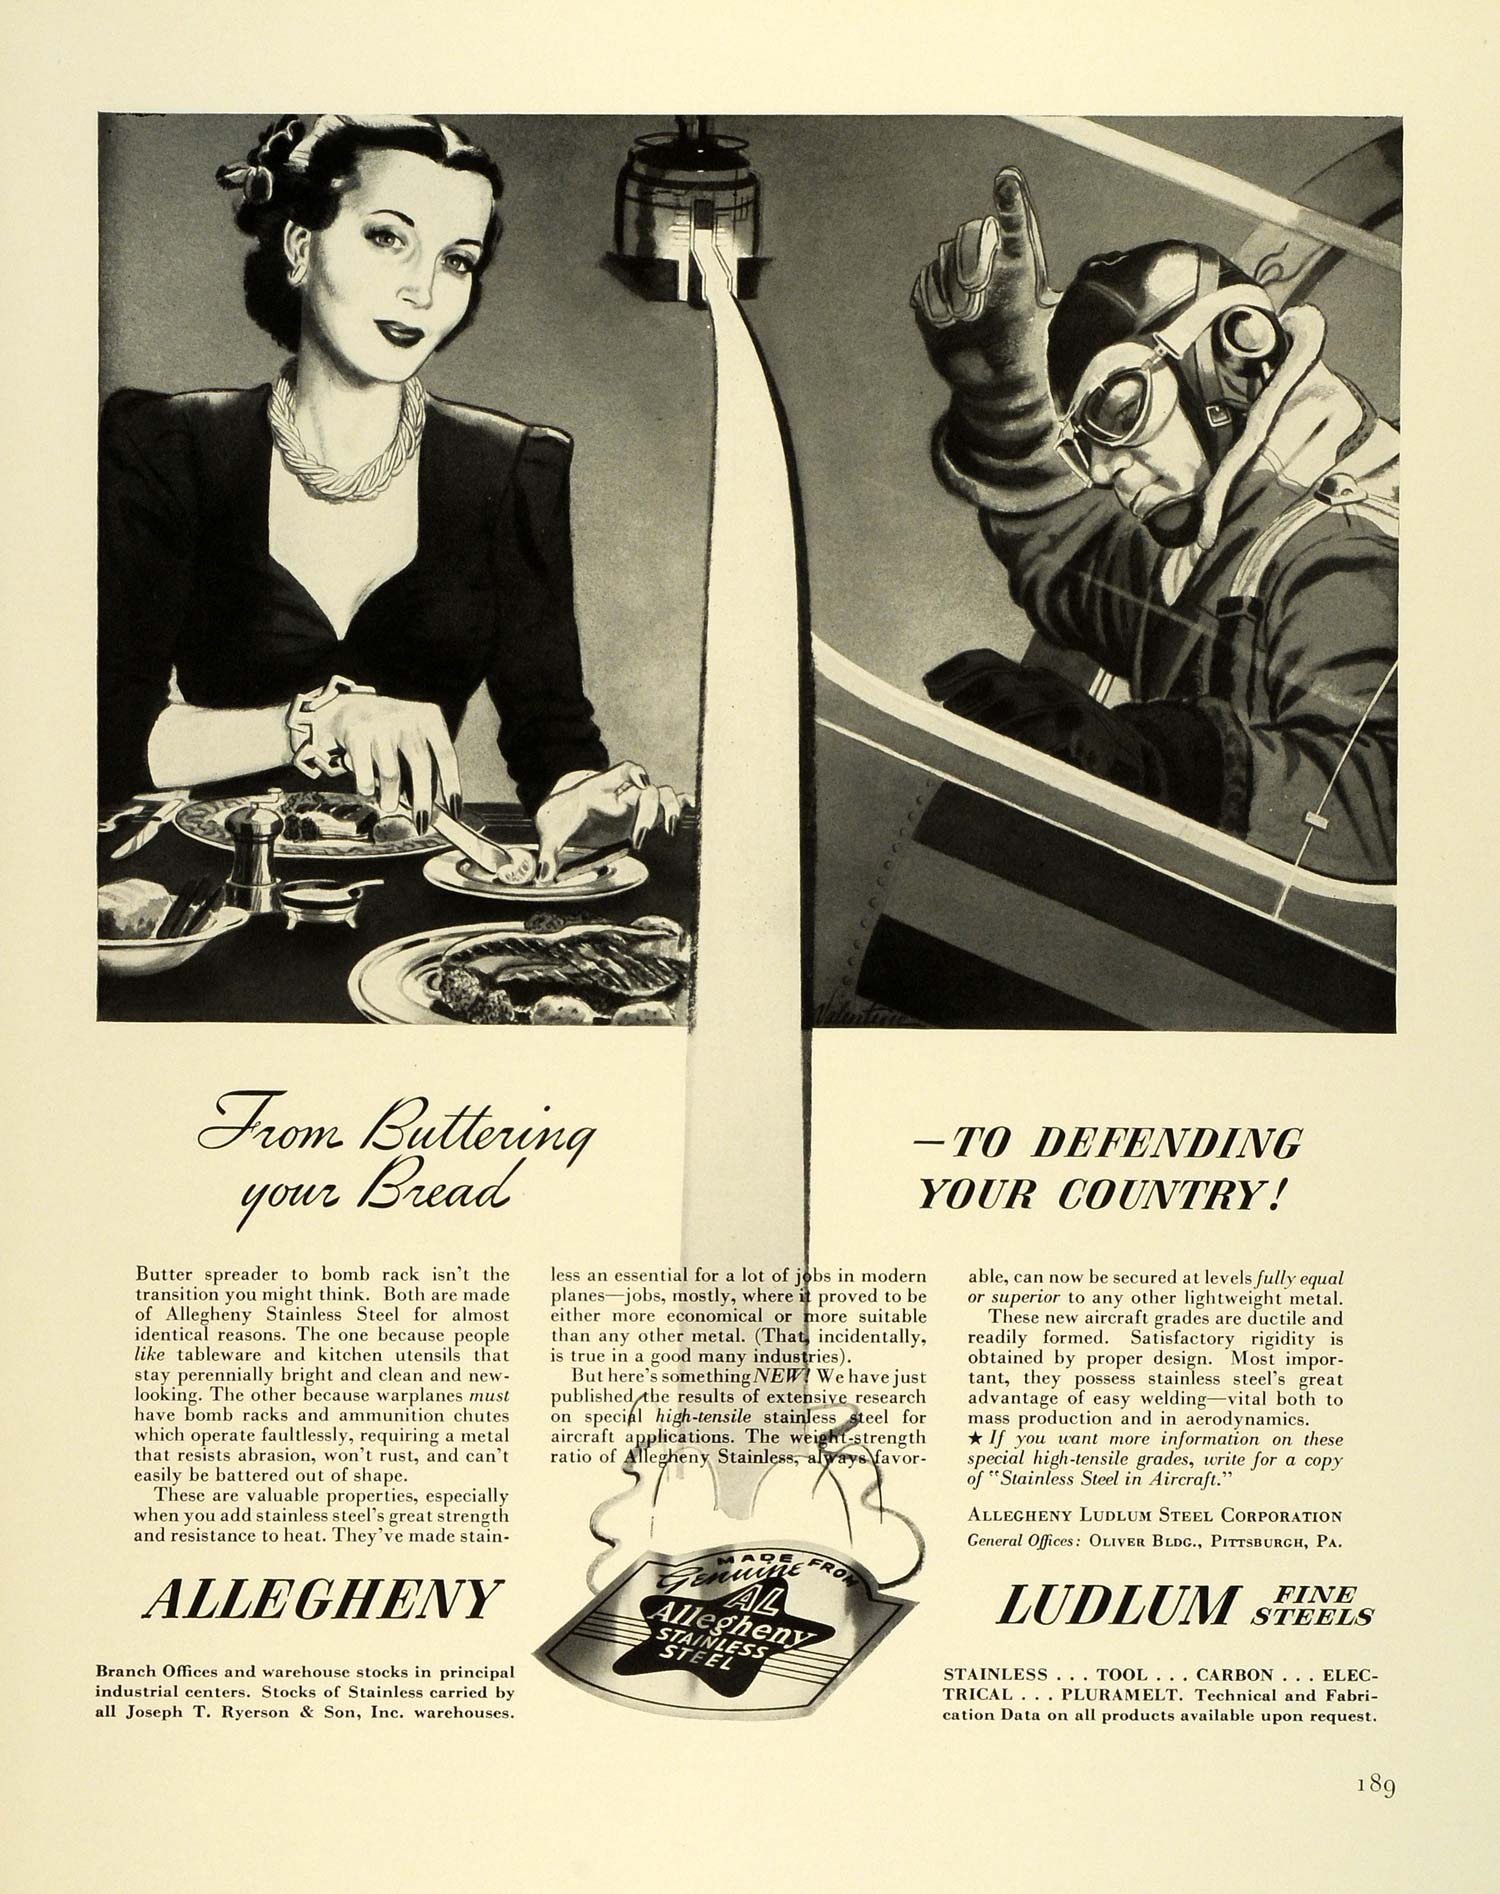 1941 Ad Allegheny Ludlum Steel Corp Stainless Steels Material bProducts FZ5